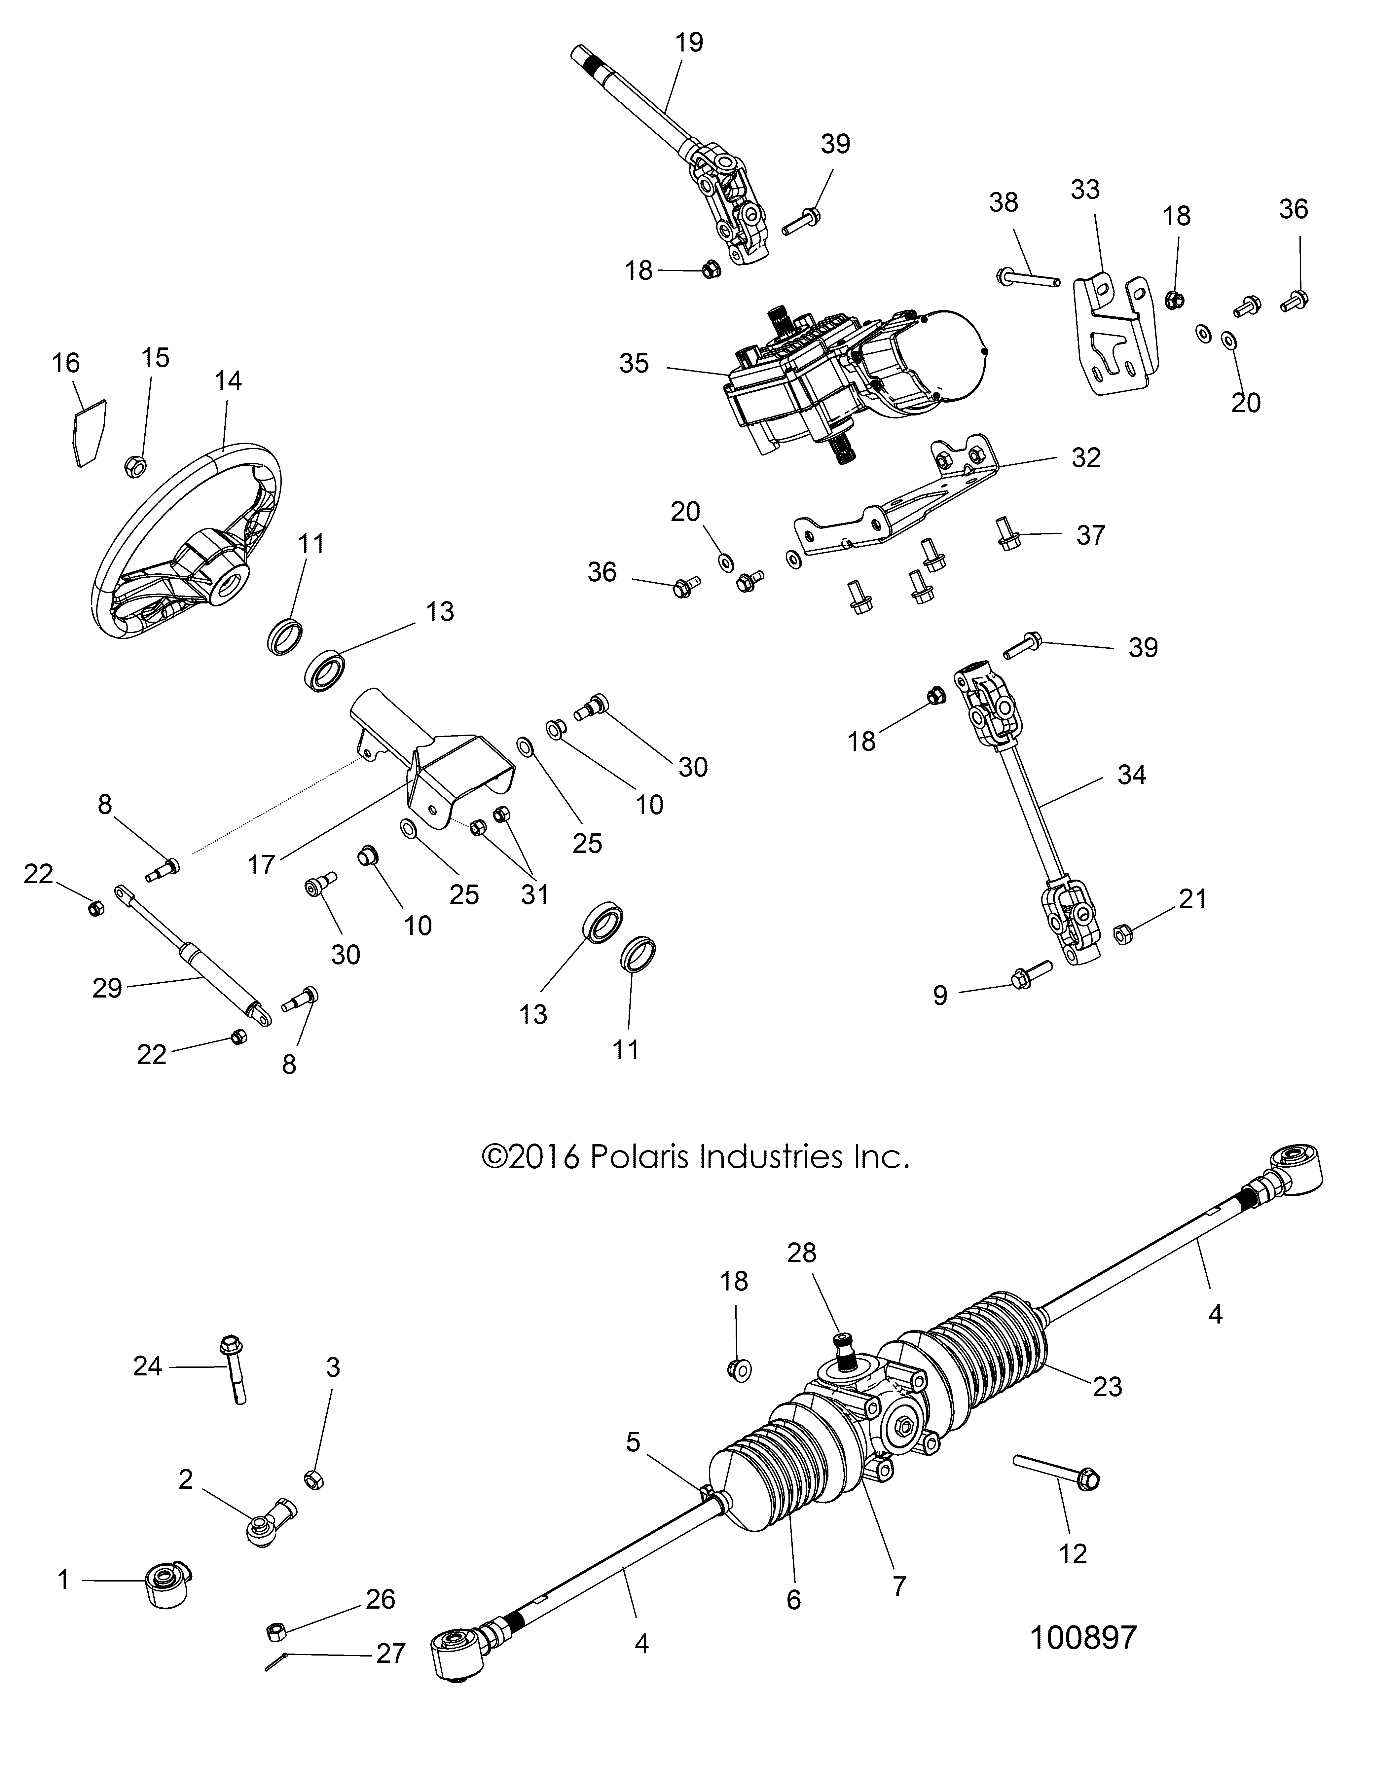 Part Number : 2413701 POWER STEERING ASSEMBLY